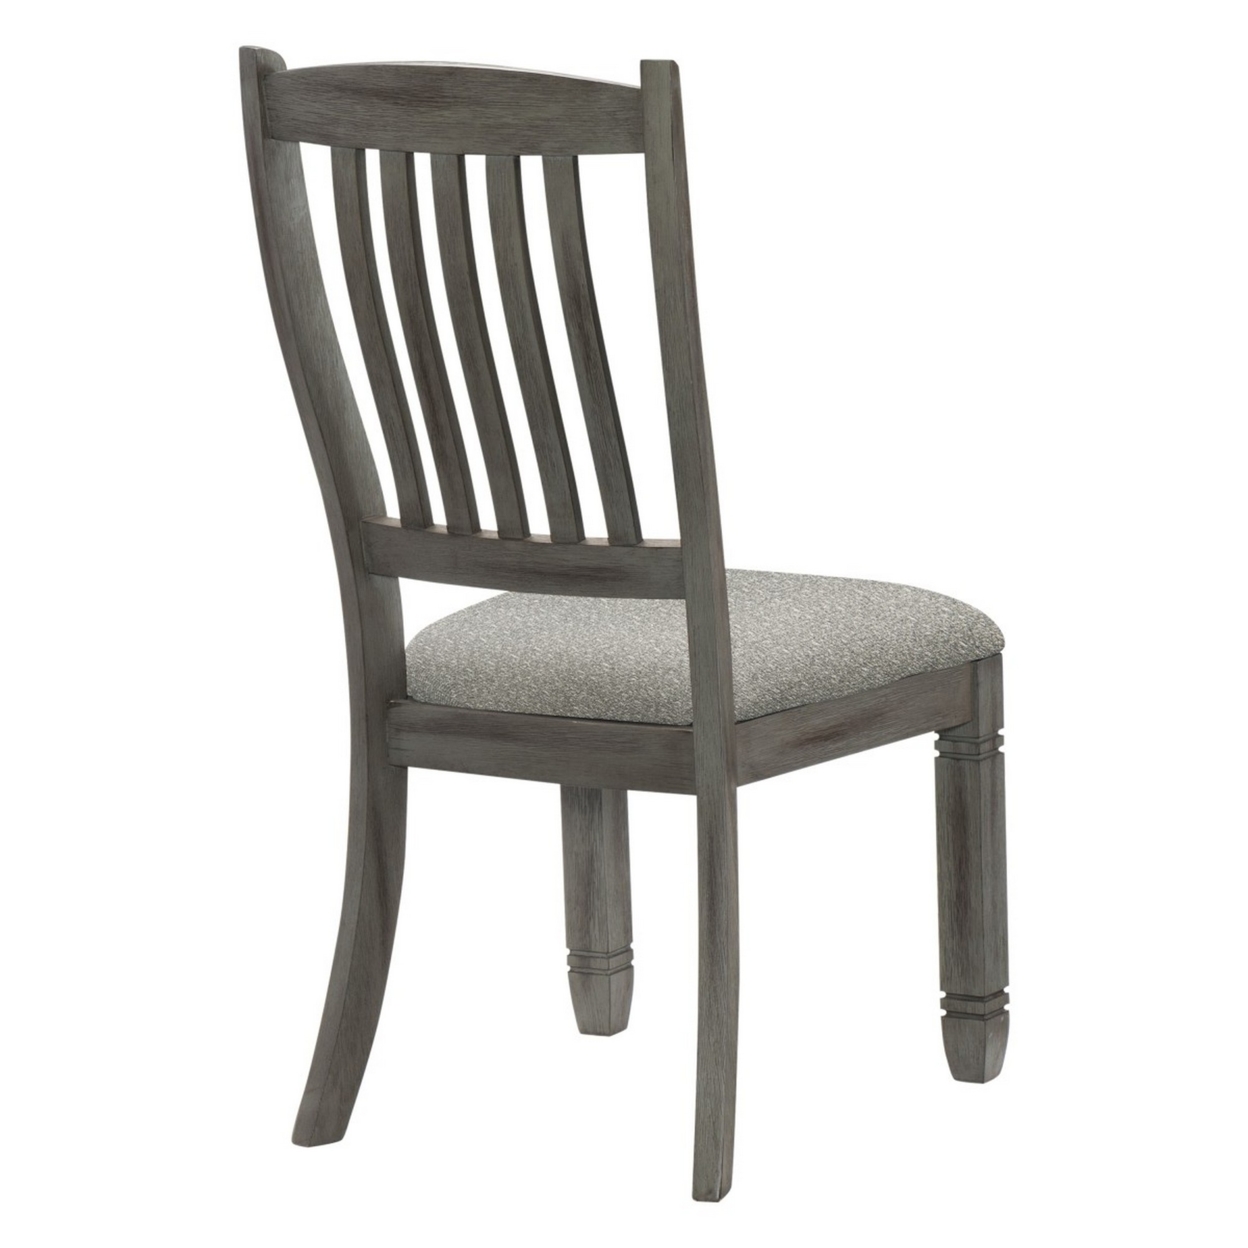 Slatted Back Wooden Side Chair With Padded Seat, Set Of 2, Gray- Saltoro Sherpi